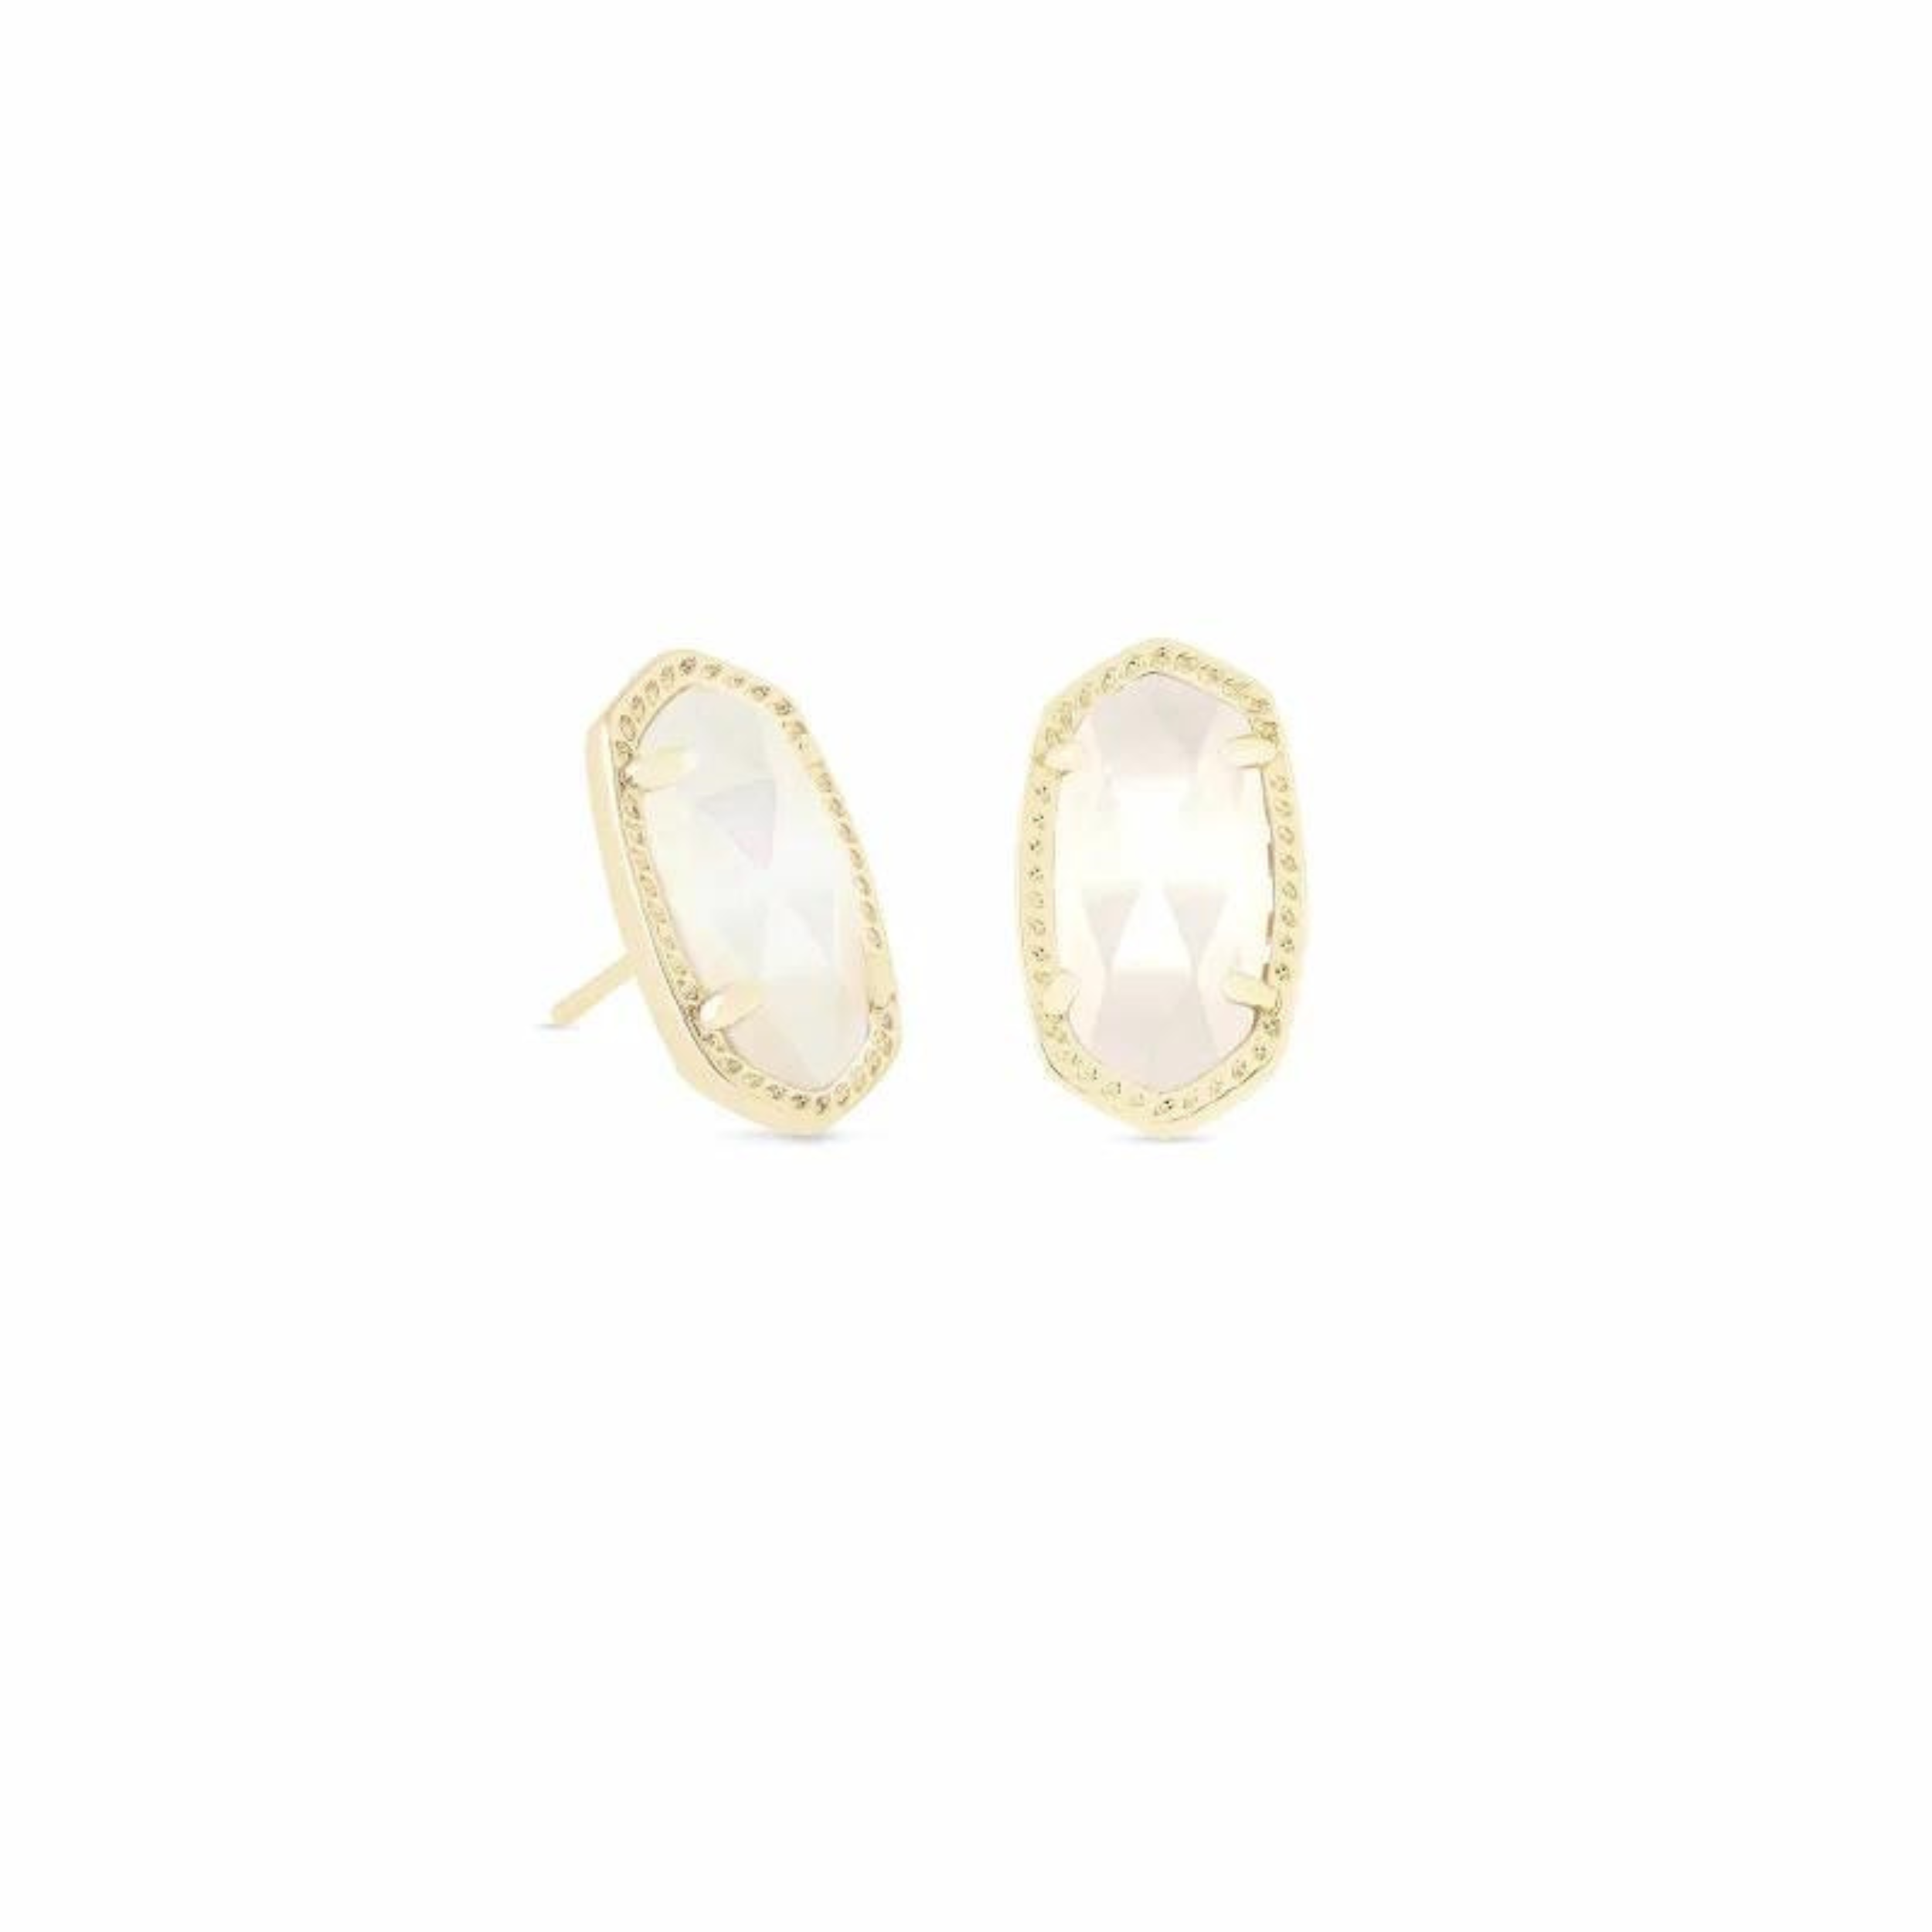 Gold stud earrings with mother of pearl stone, pictured on a white background.